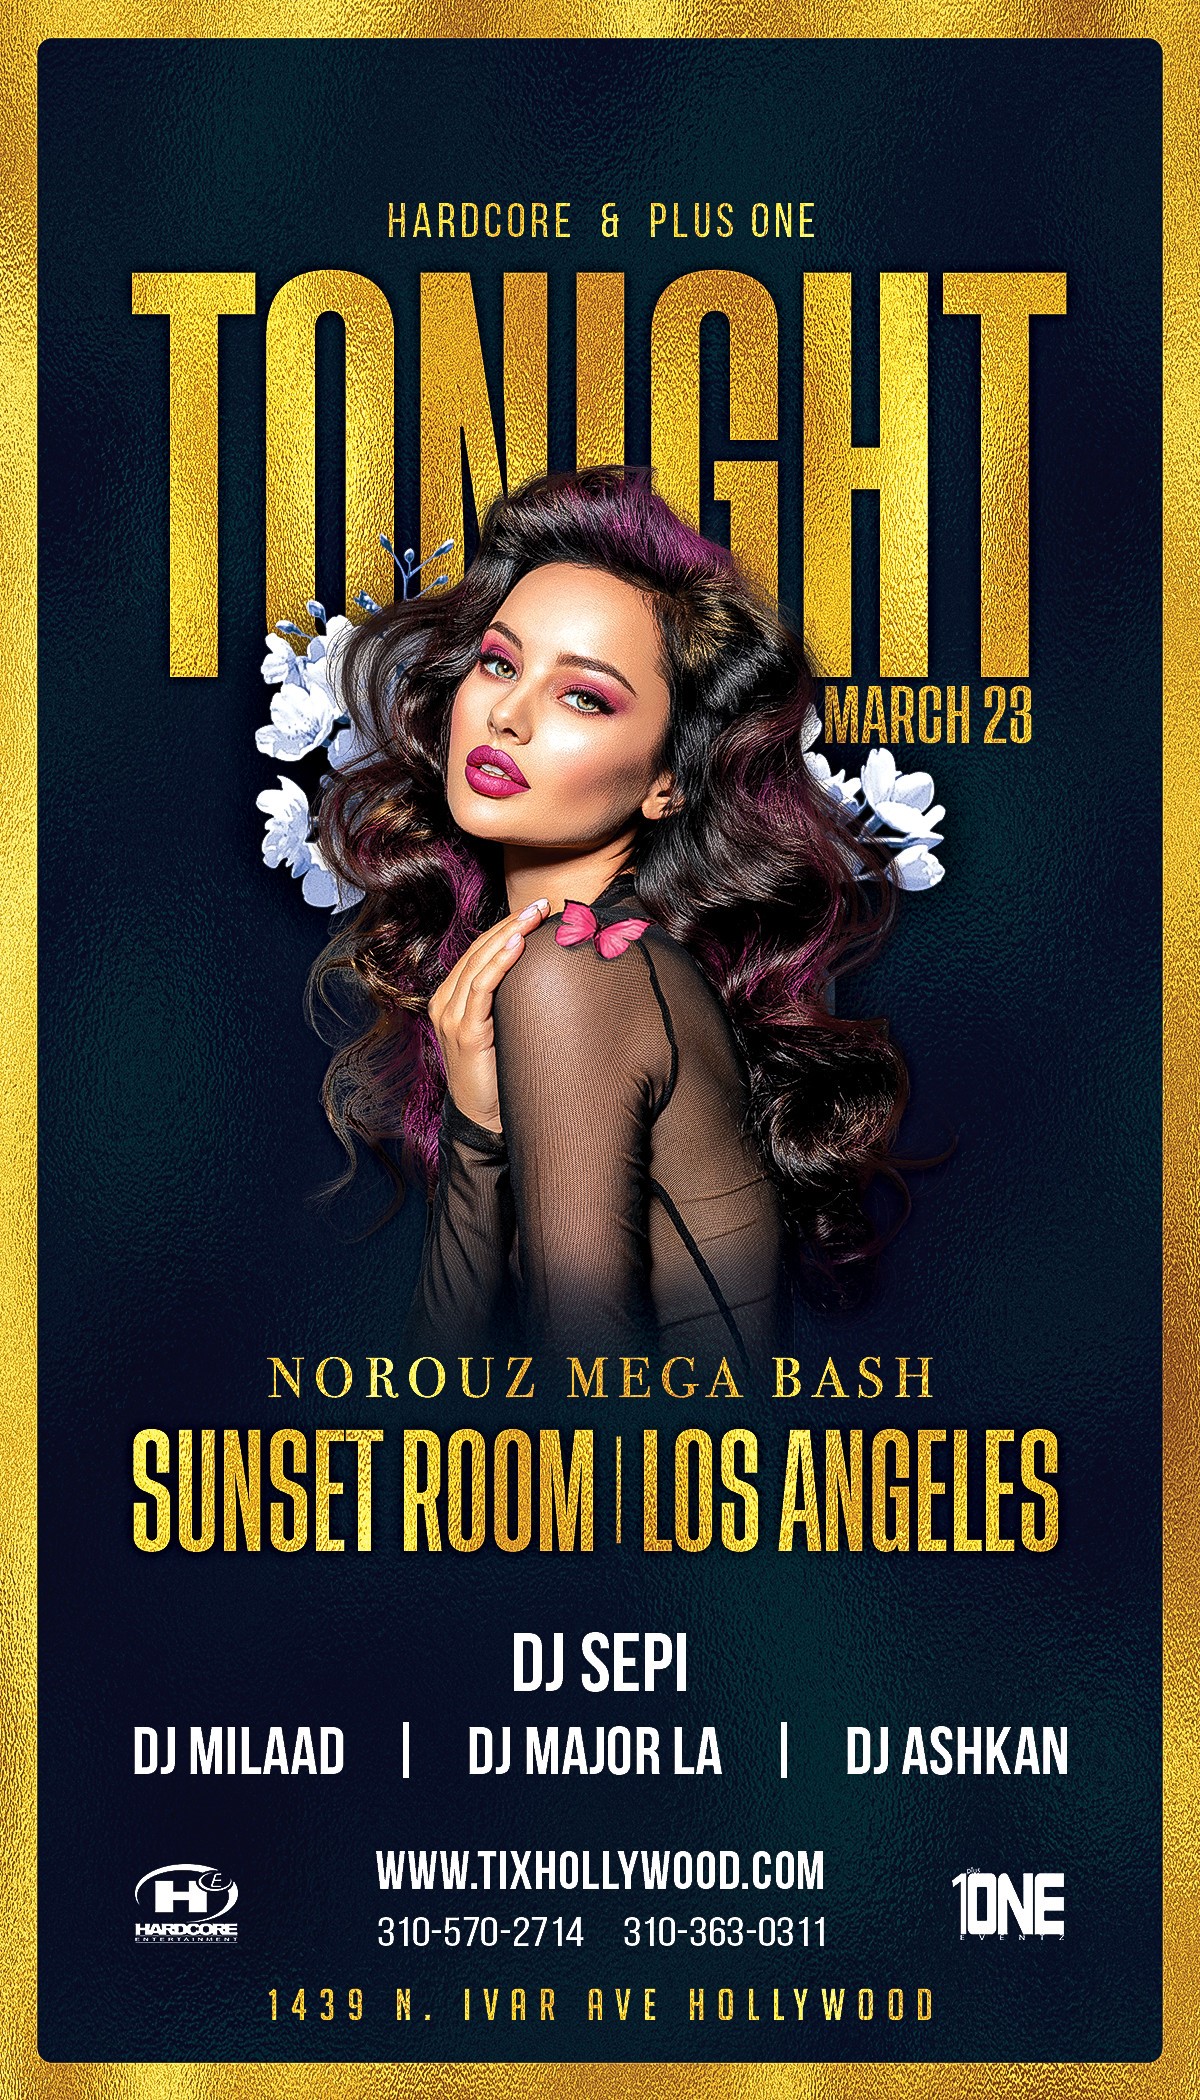 Norouz Mega Bash in Los Angeles @ SUNSET ROOM Nightclub! Saturday, March 23, 2024 on Mar 23, 22:00@Sunset Room - Buy tickets and Get information on HARDCORE & PLUS ONE tixhollywood.com